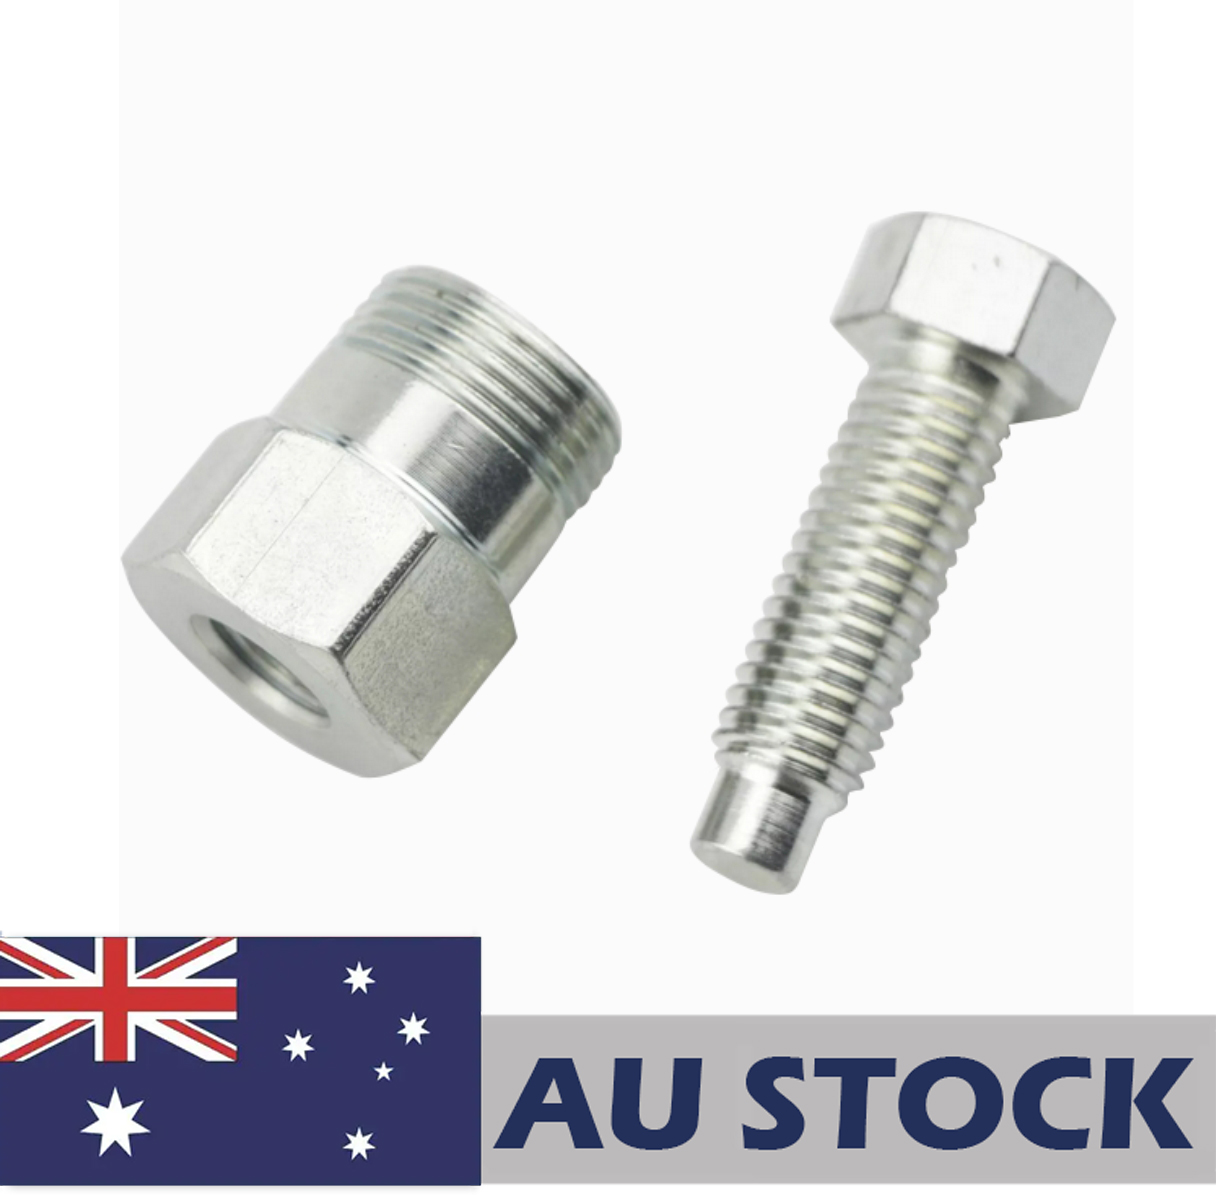 AU STOCK only to AU ADDRESS - Flywheel Puller For Stihl 024 026 028 030 031 041 044 046 050 051 MS240 MS260 MS280 MS340 MS360 MS380 MS381 AV MAGNUM MS440 MS460 Chainsaw # 1110 890 4500 2-4 Days Delivery Time Fast Shipping For AU Customers Only